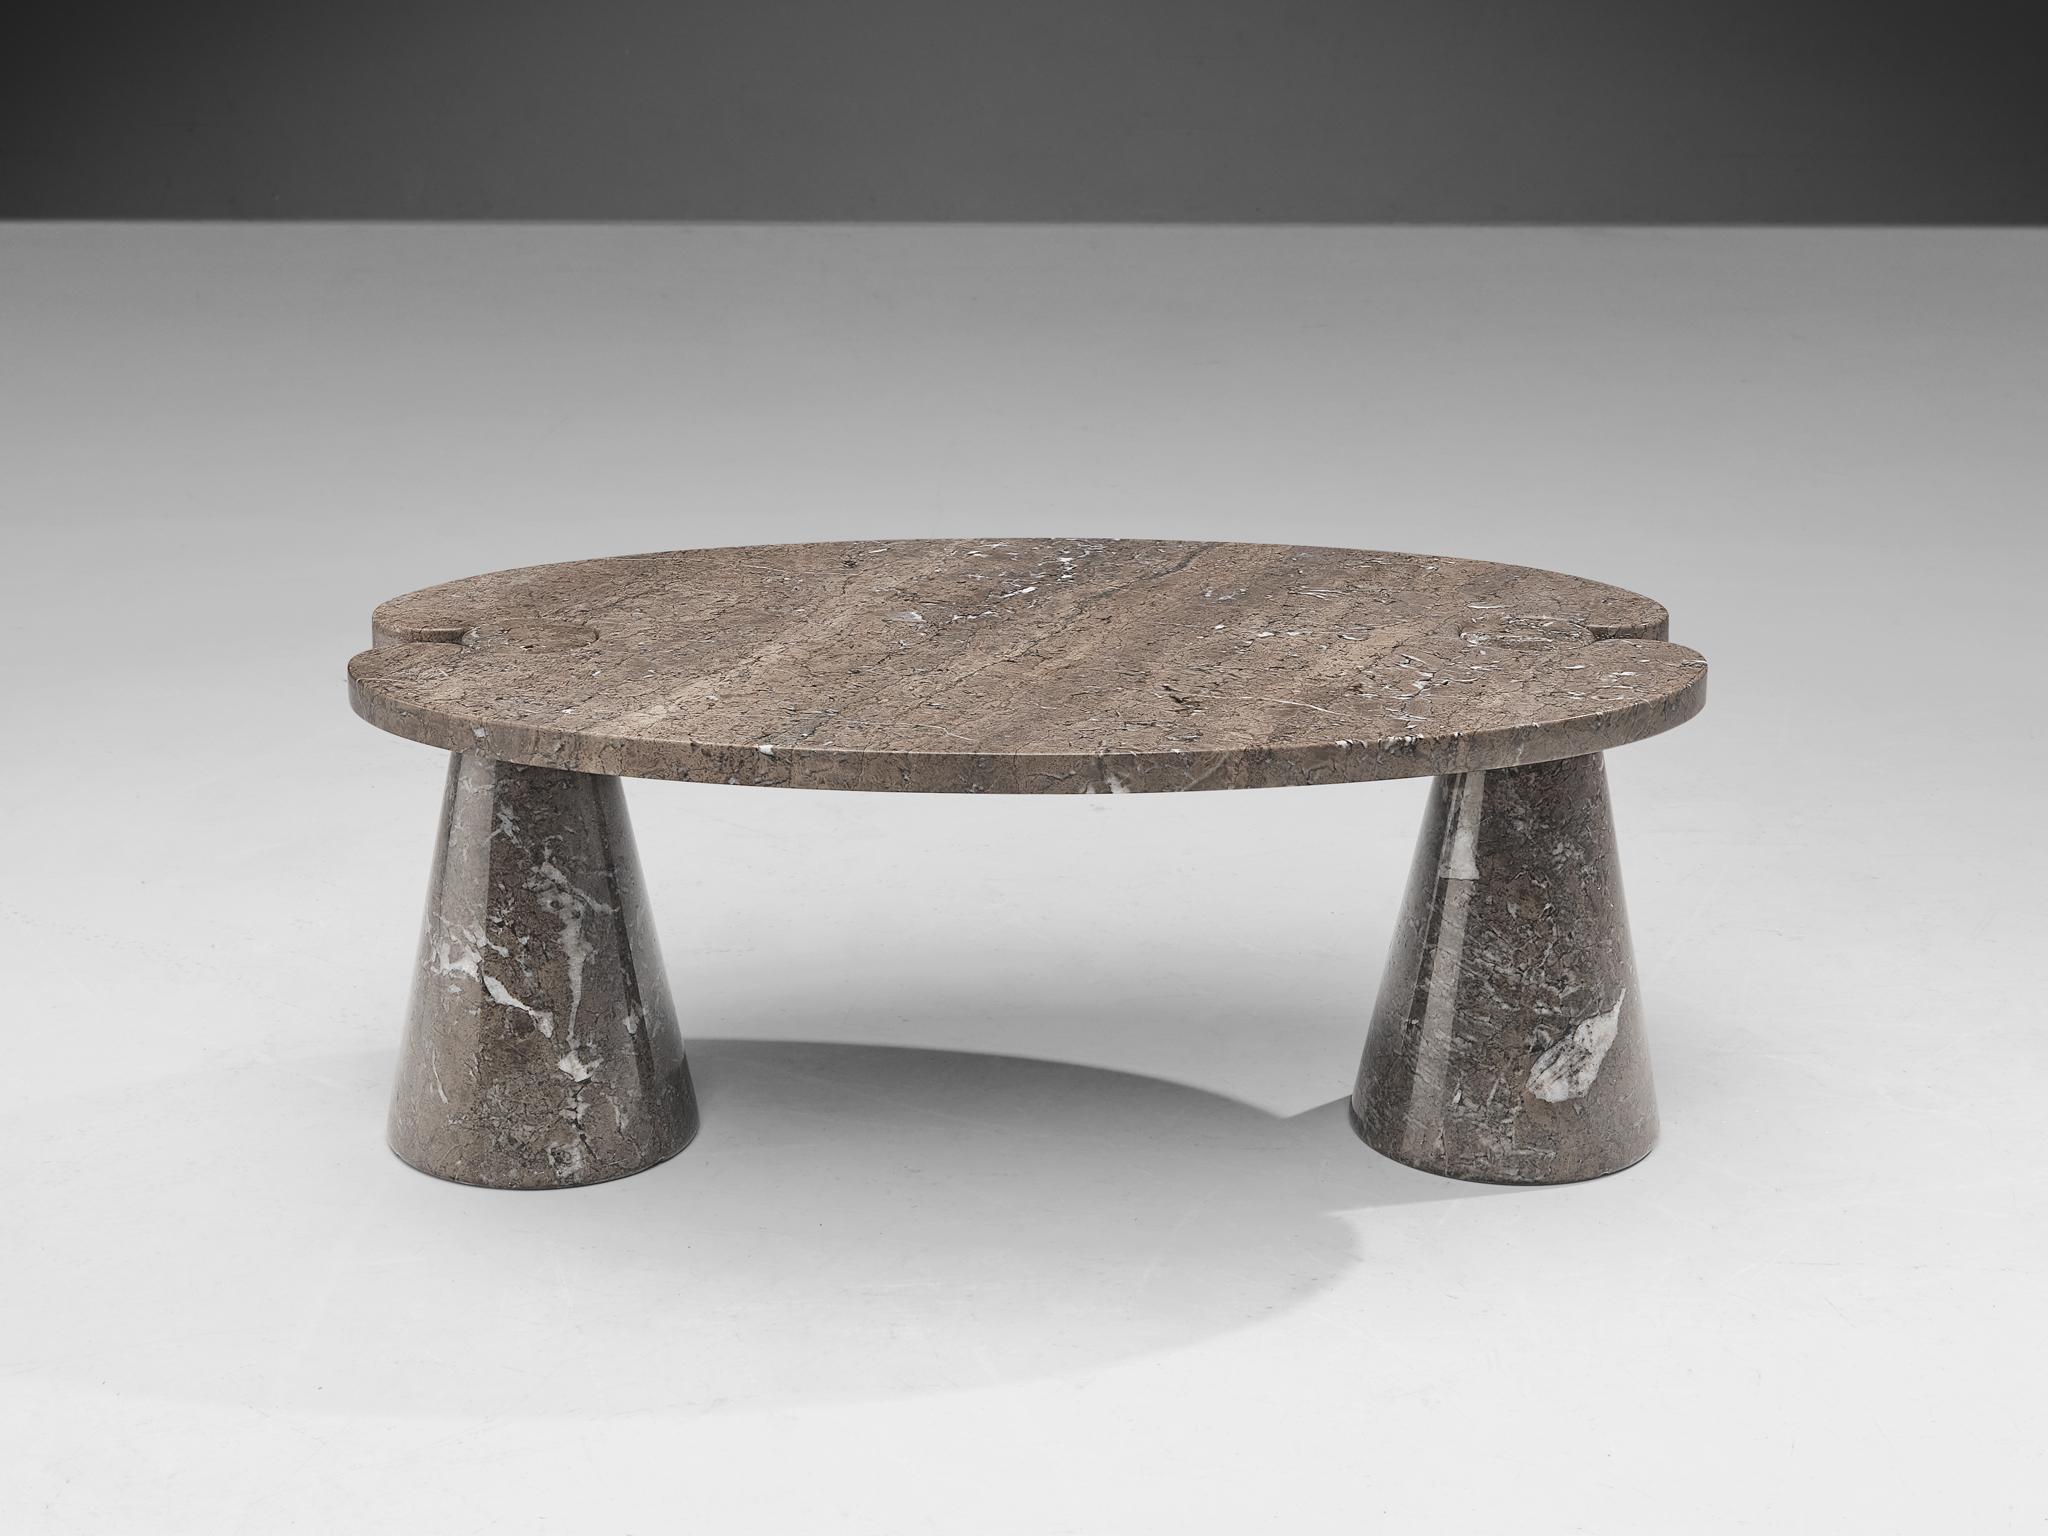 Angelo Mangiarotti for Skipper, side table 'Eros', marble, Italy, 1970s.

This sculptural coffee table by Angelo Mangiarotti is a skillful example of postmodern design. The table is executed in grey marble. The oval table features no joints or